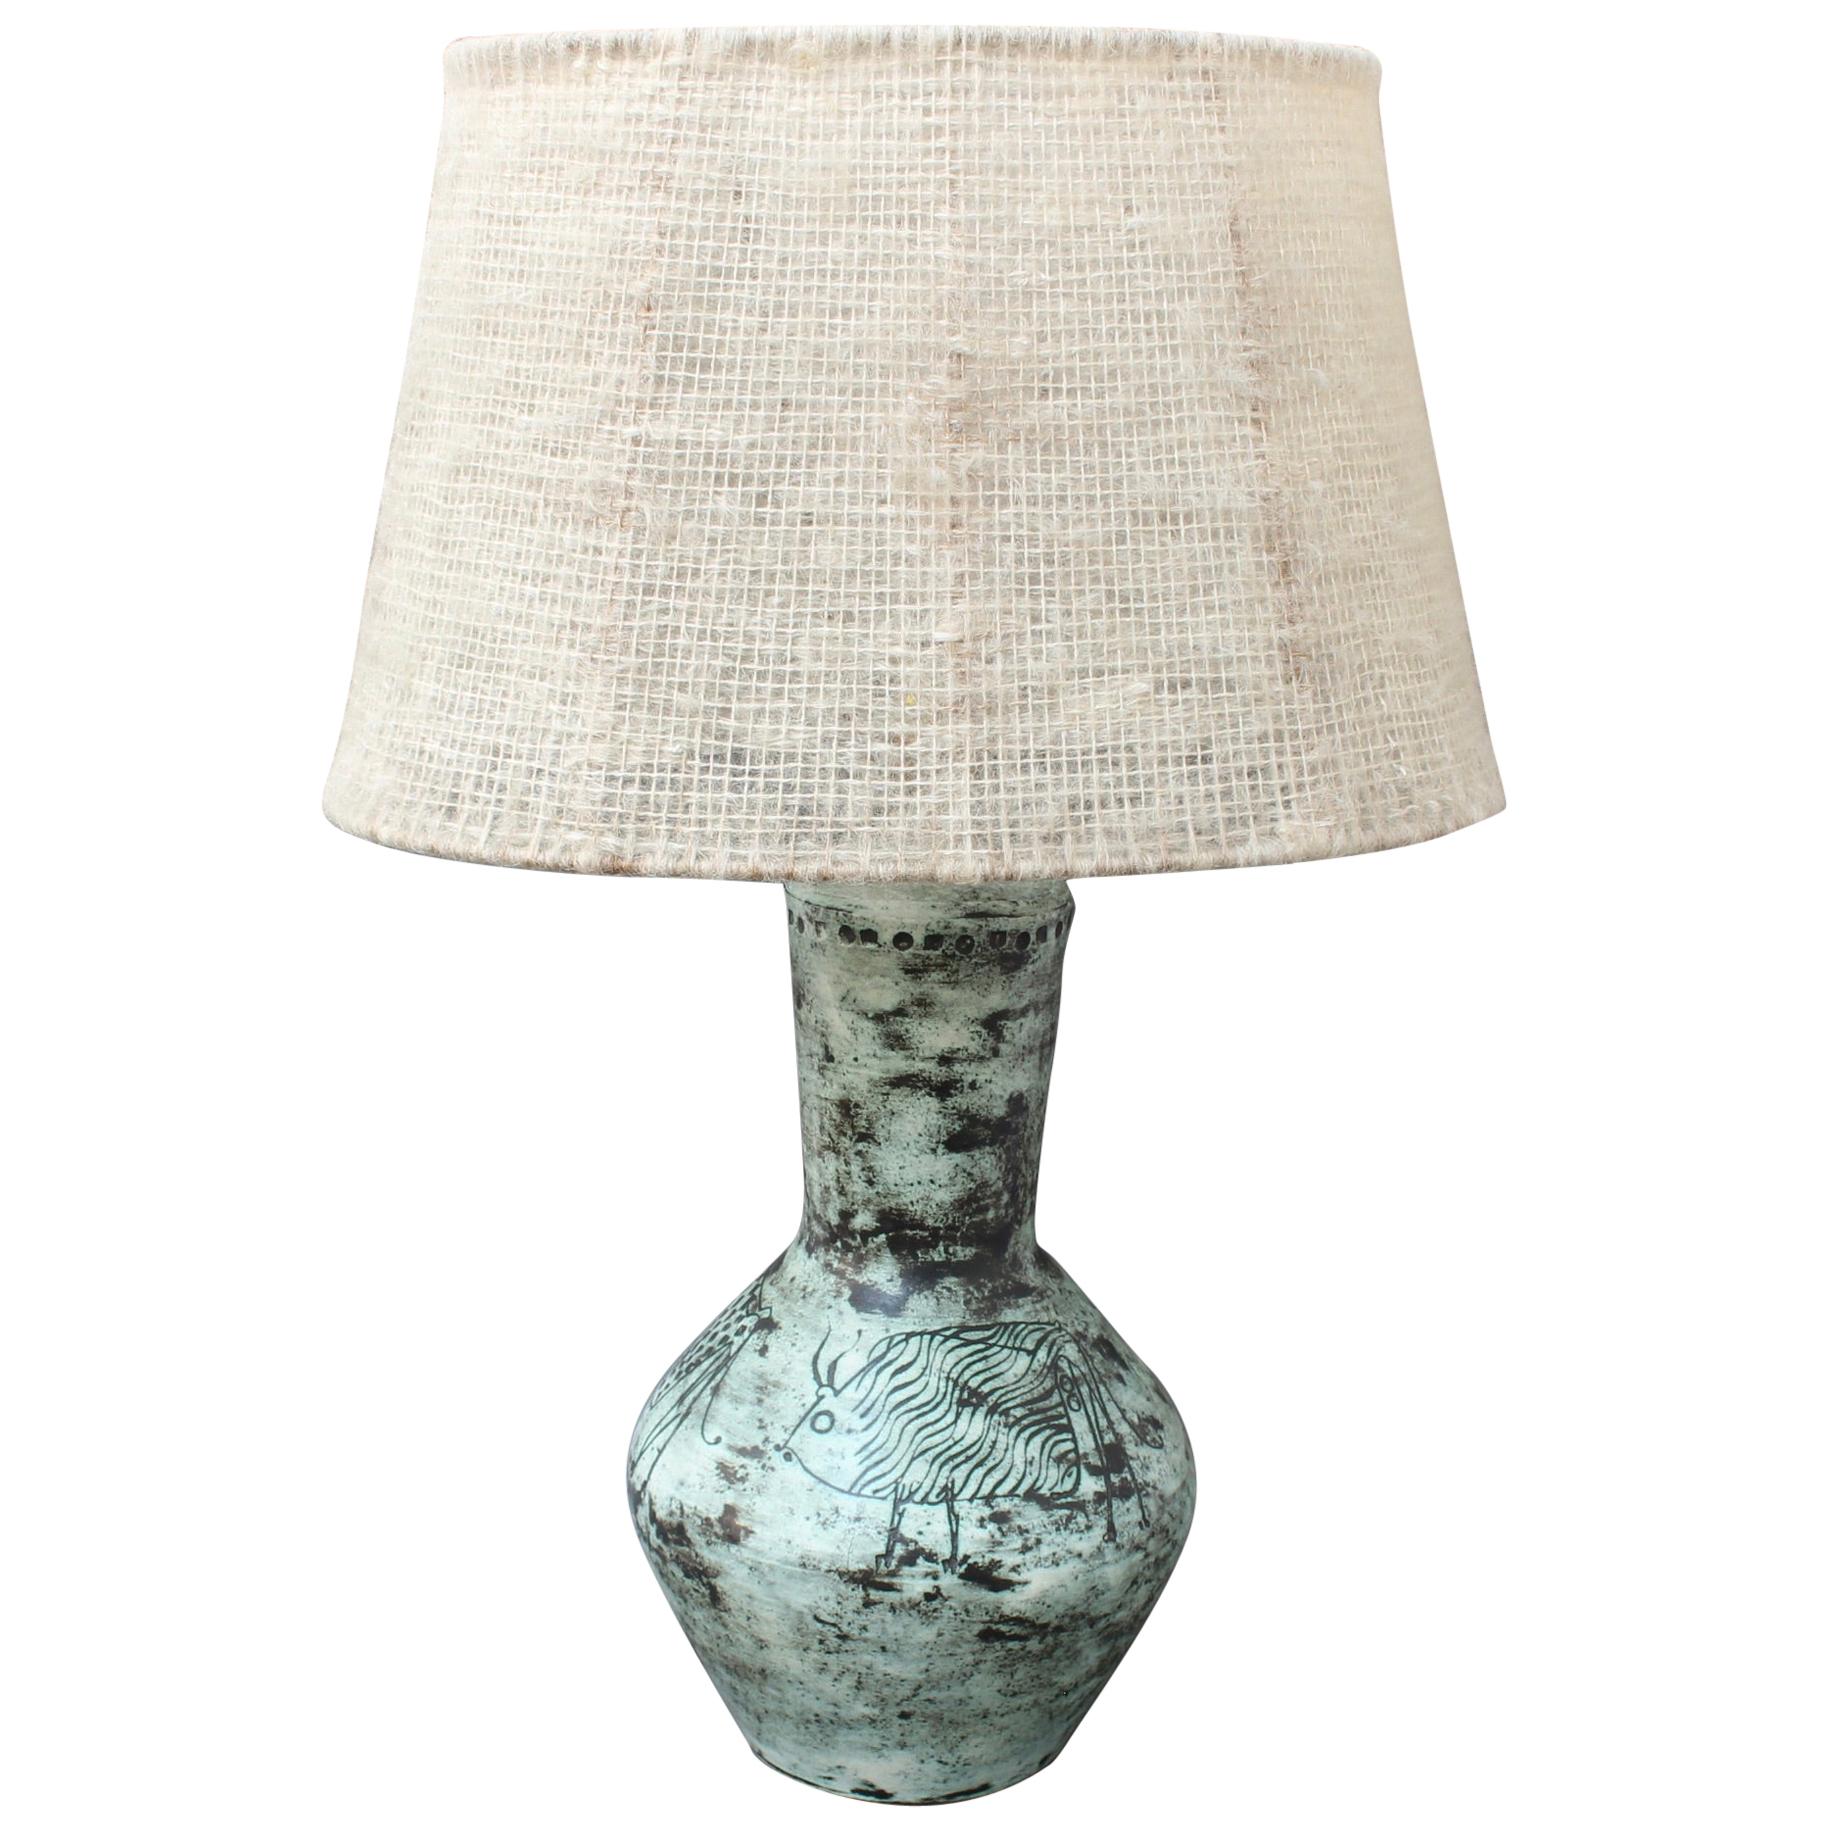 Vintage French Ceramic Lamp by Jacques Blin 'circa 1950s'